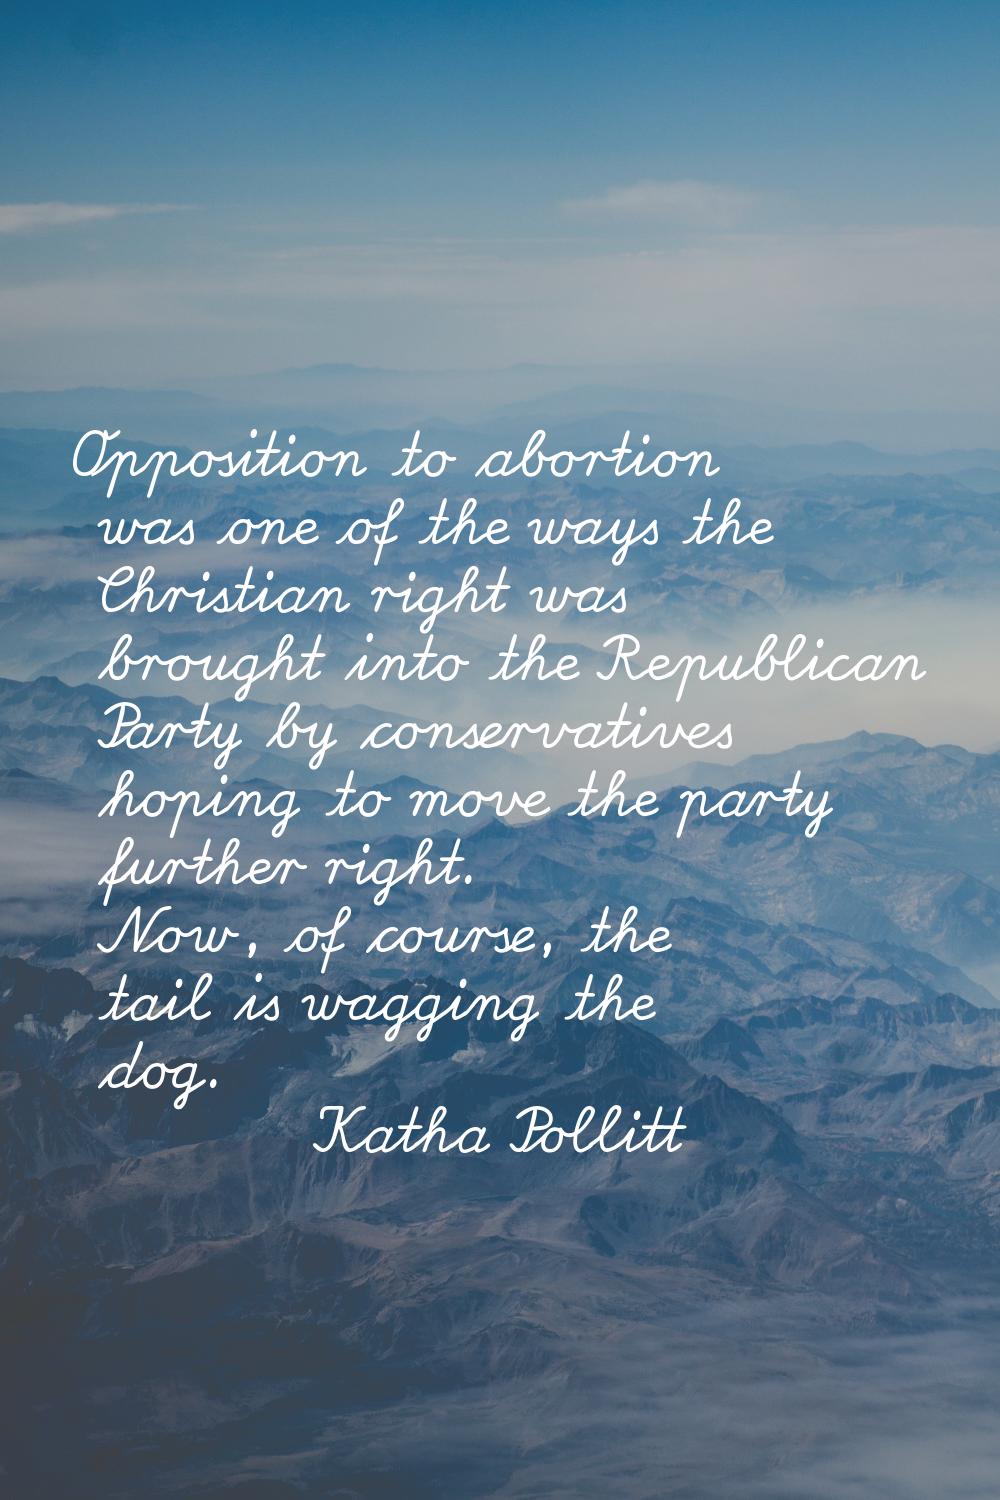 Opposition to abortion was one of the ways the Christian right was brought into the Republican Part